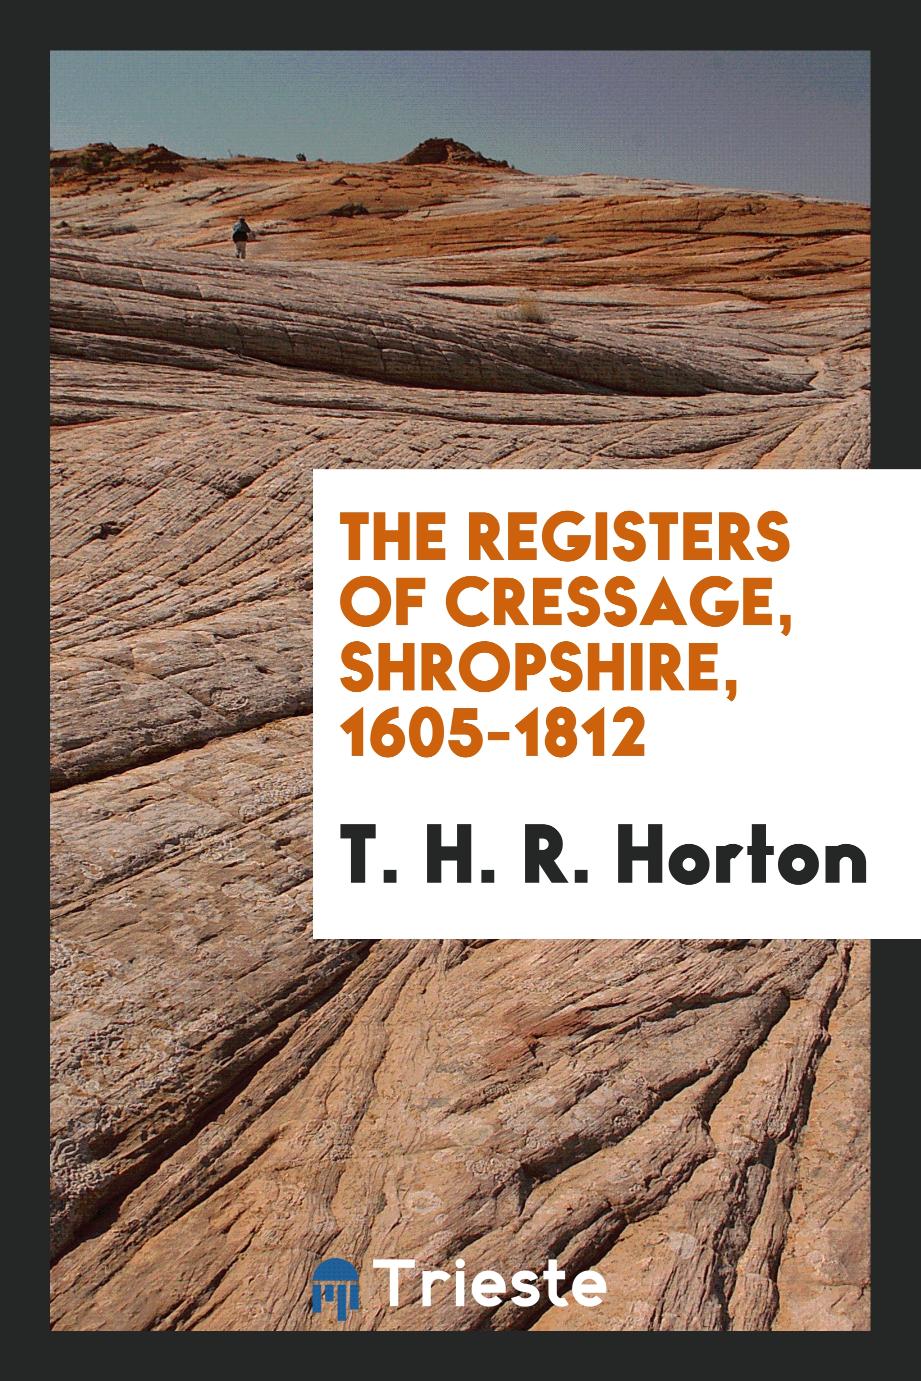 The registers of Cressage, shropshire, 1605-1812